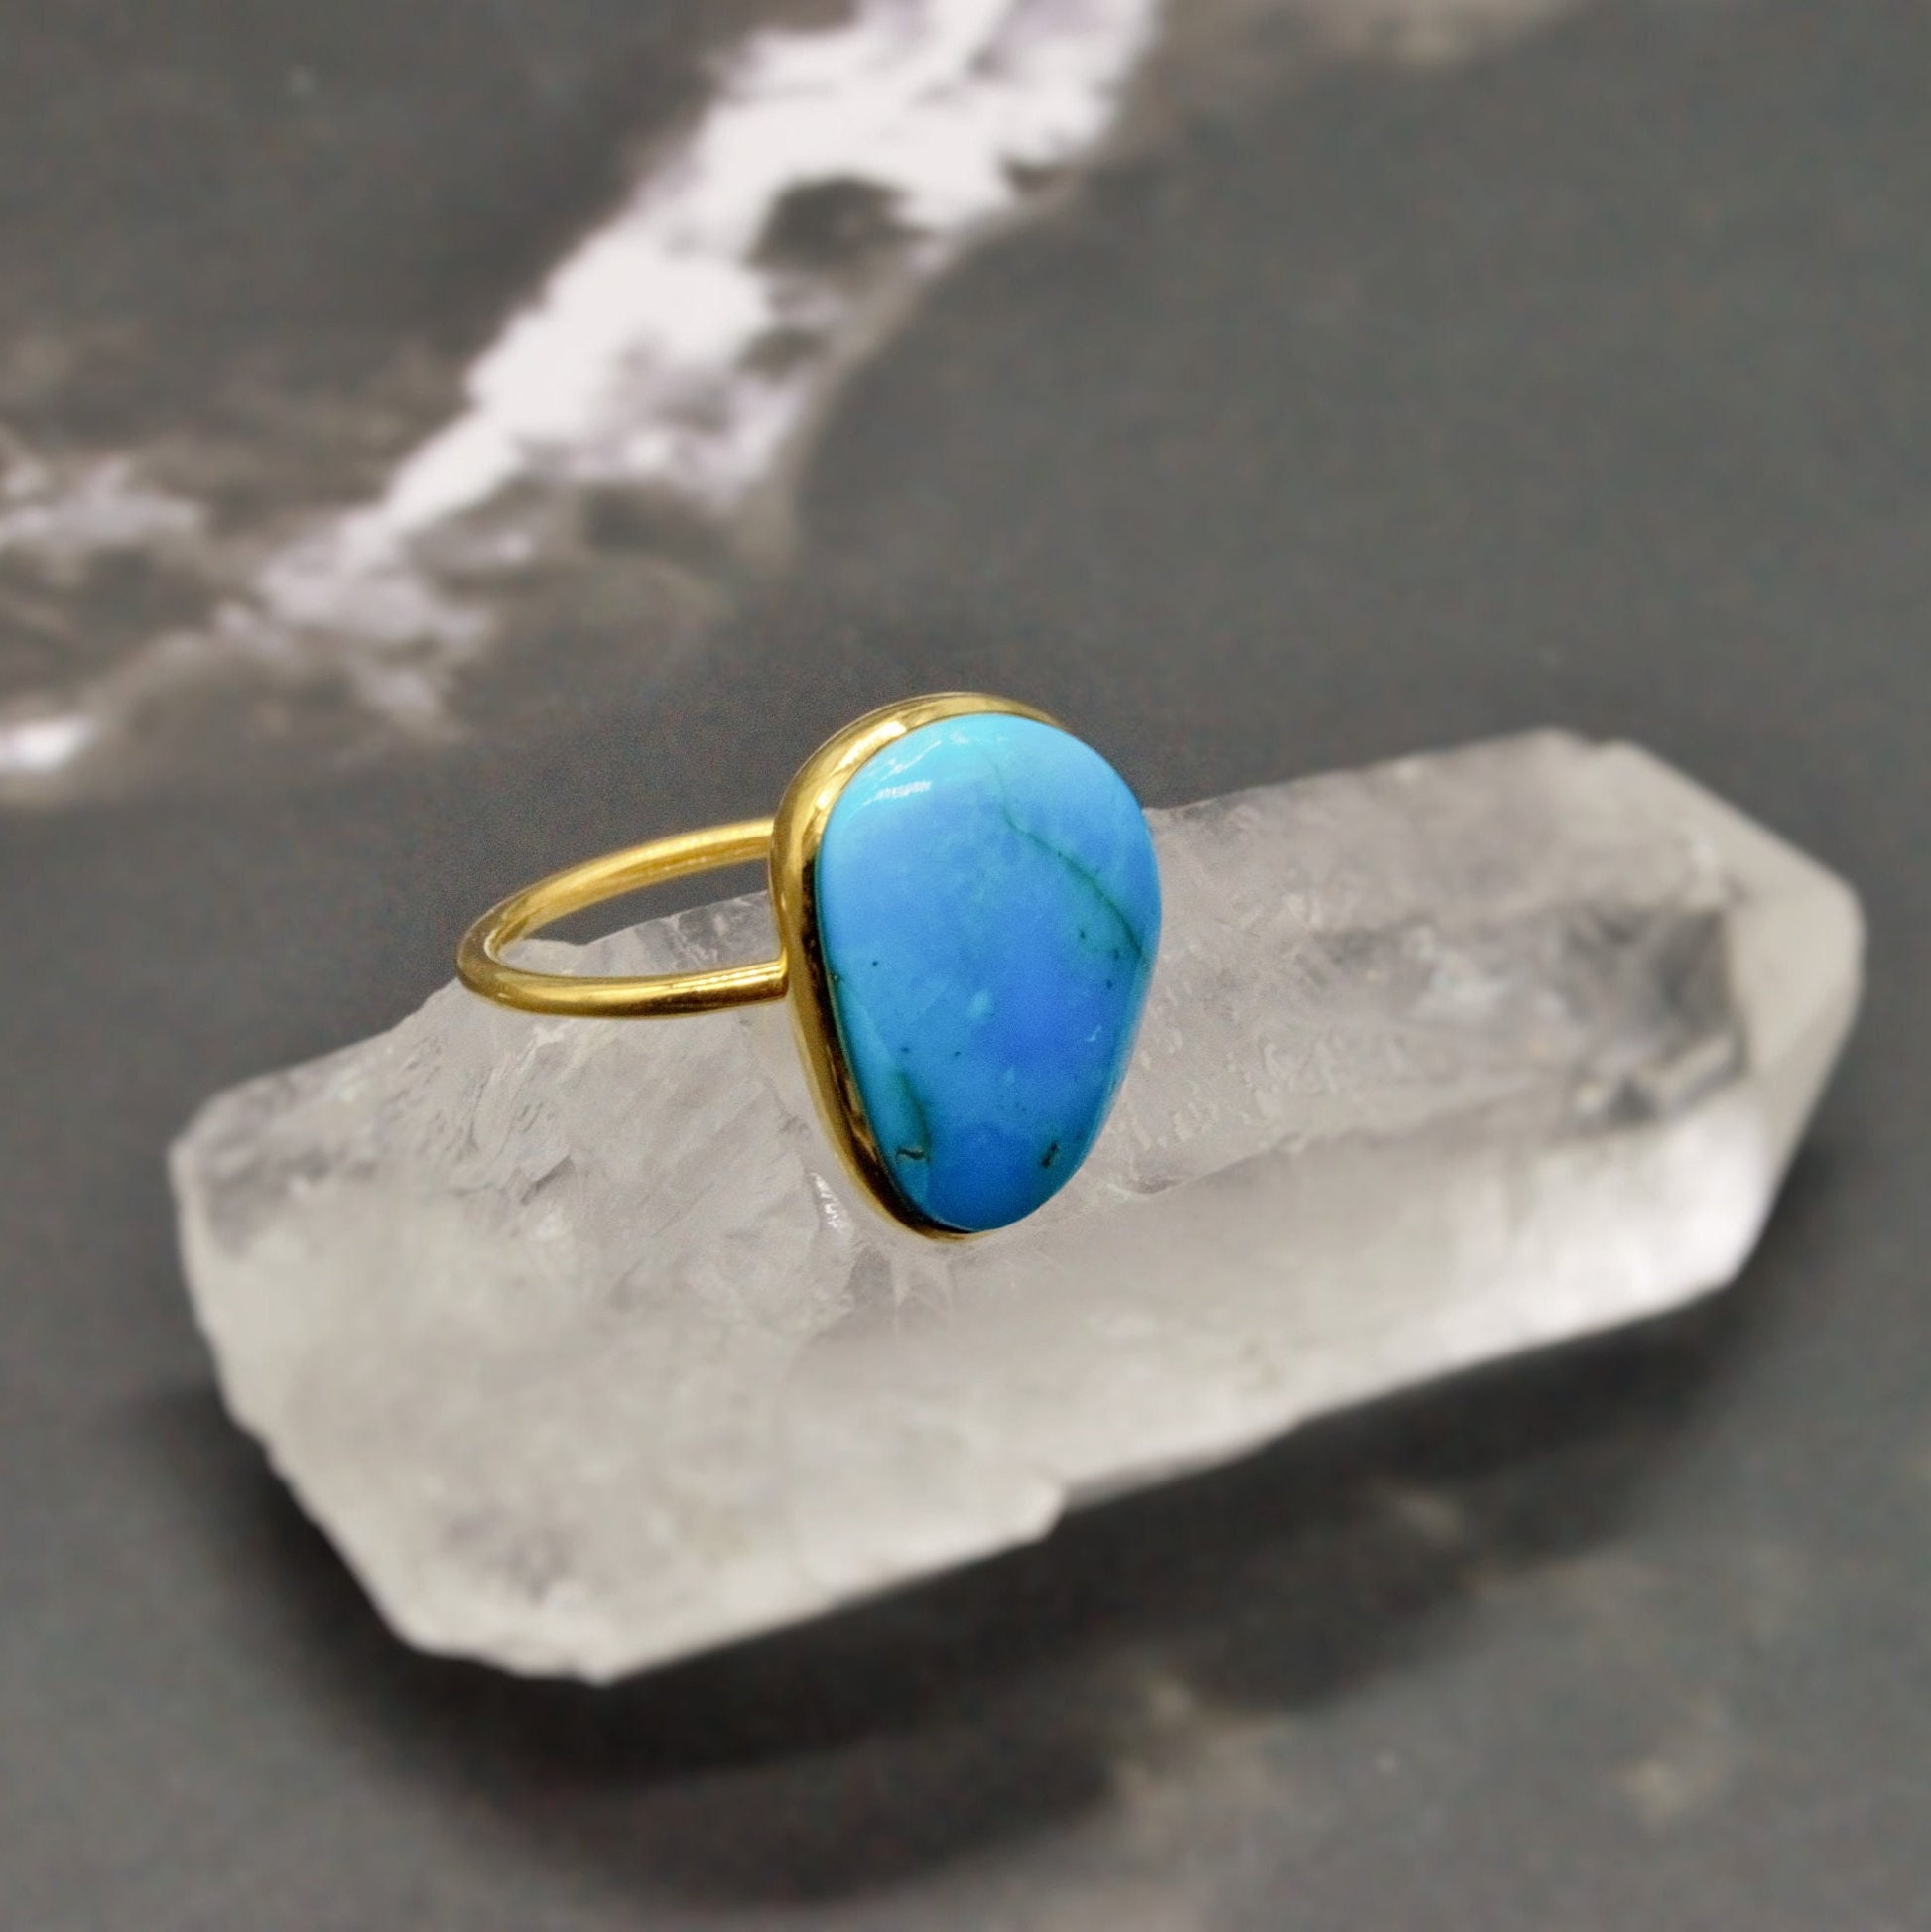 Gold Turquoise Ring, Gold Plated Sterling Silver Ring, December Birthstone, Gifts For Her, Birthday, Anniversary, Birthstone Ring